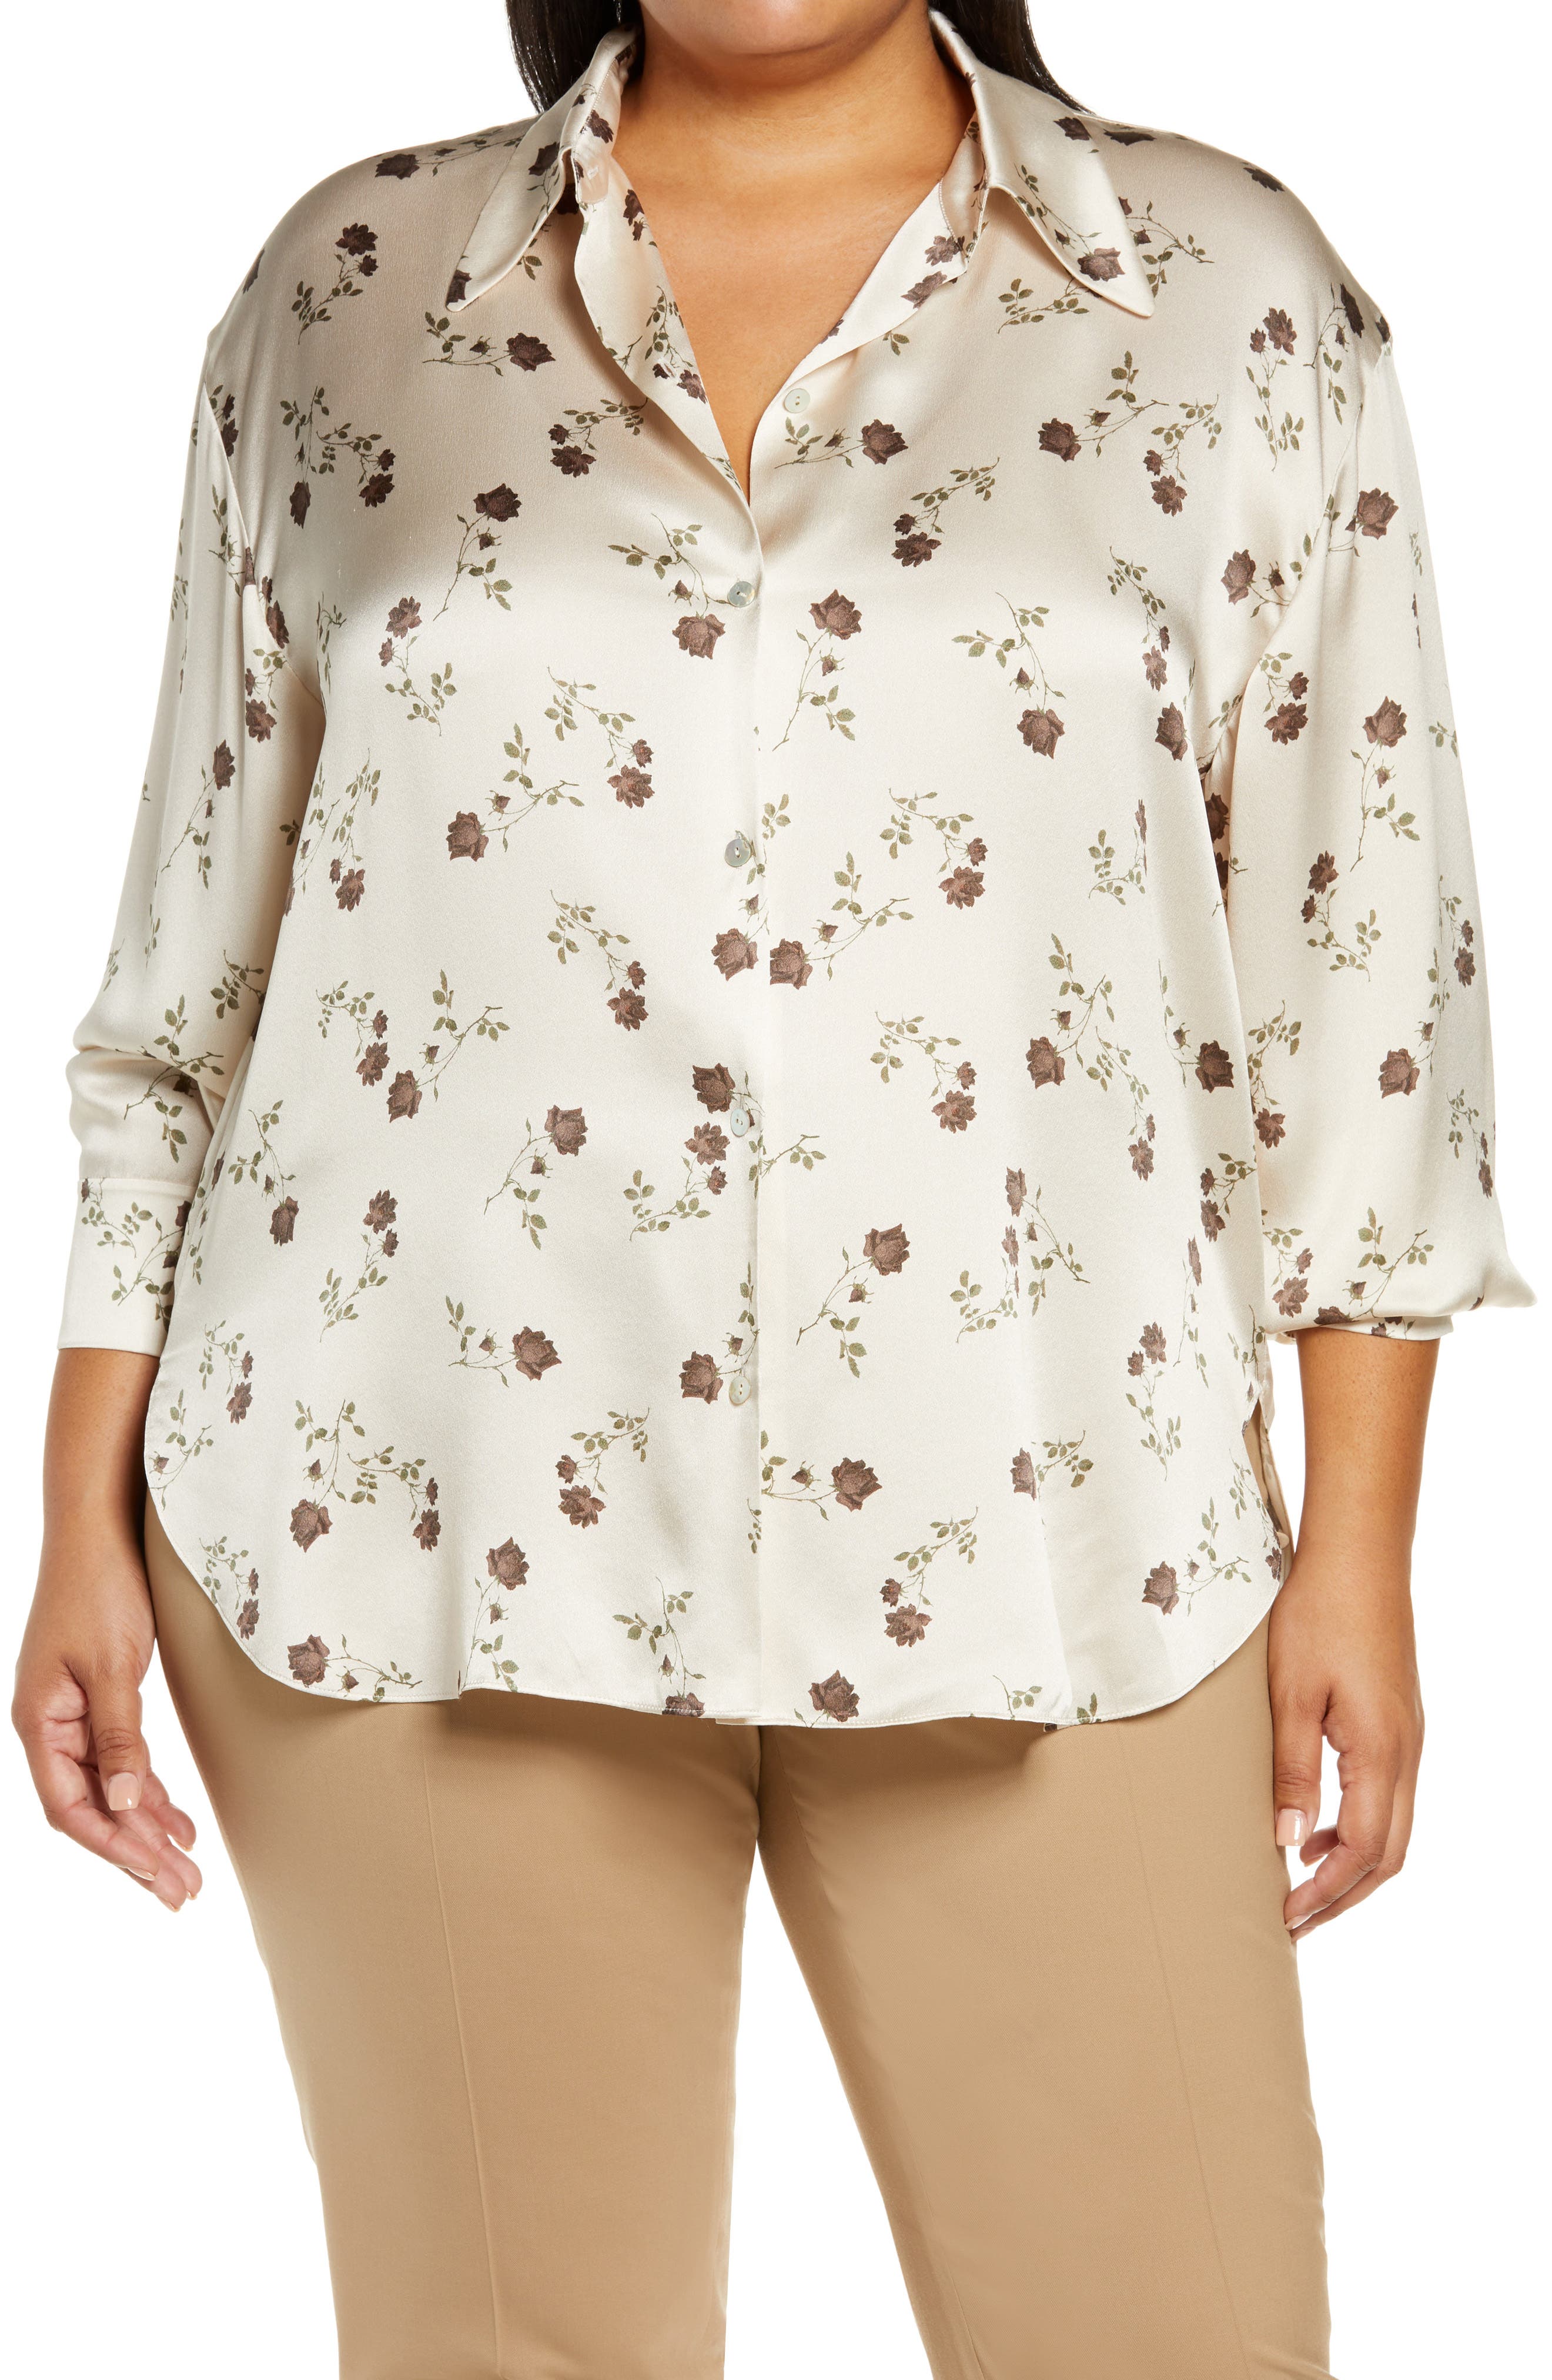 100% Silk Plus-Size Tops for Women ...